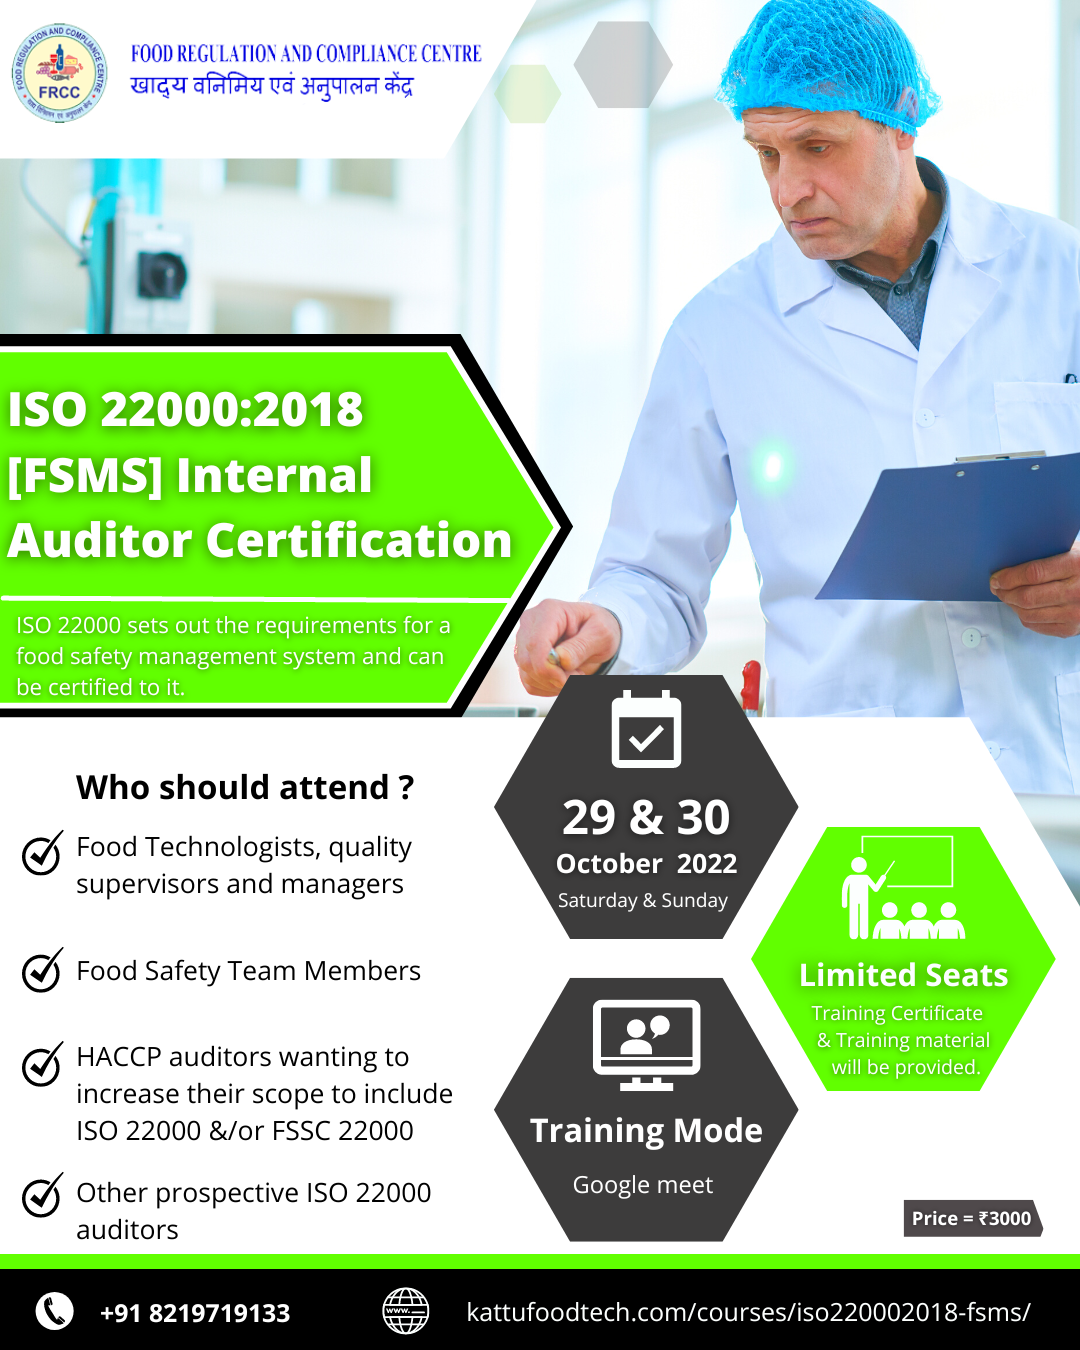 ISO 22000:2018 Internal Auditor - 2 Days Certification Course by FRCC [ Food Regulation and Compliance Centre, New Delhi ]...